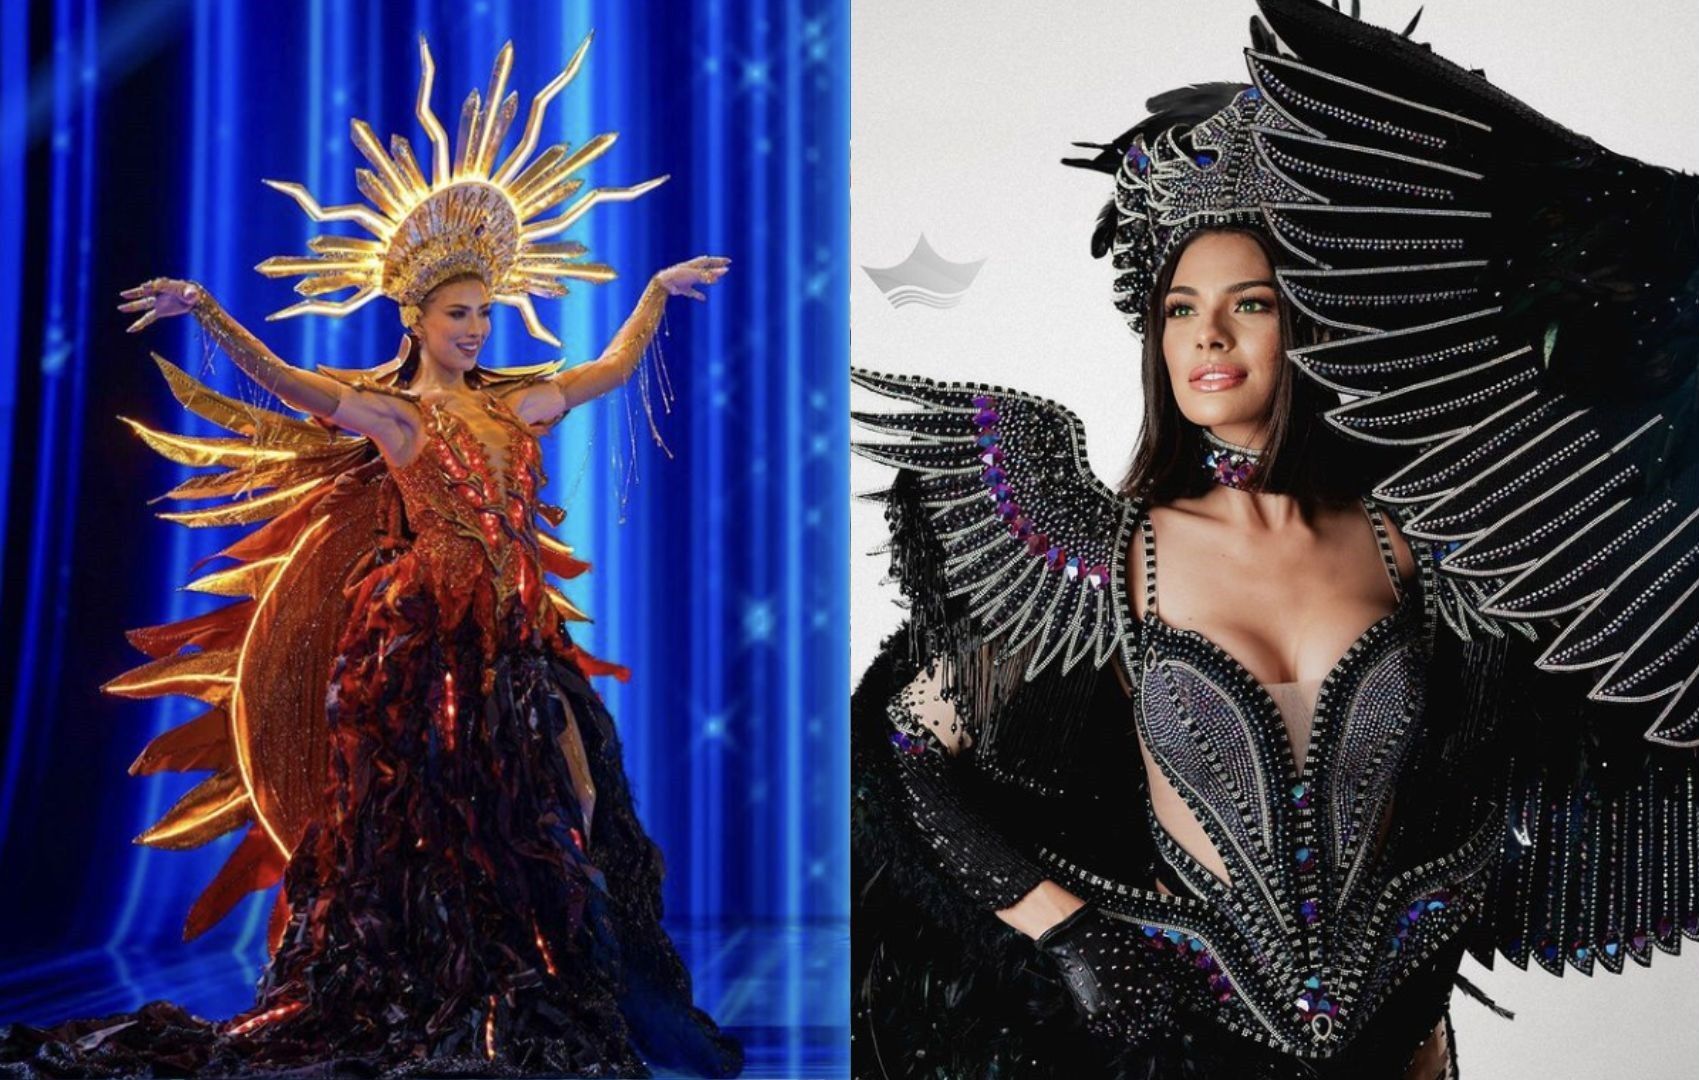 El Salvador, Nicaragua stand out in Miss Universe 2023 national costume